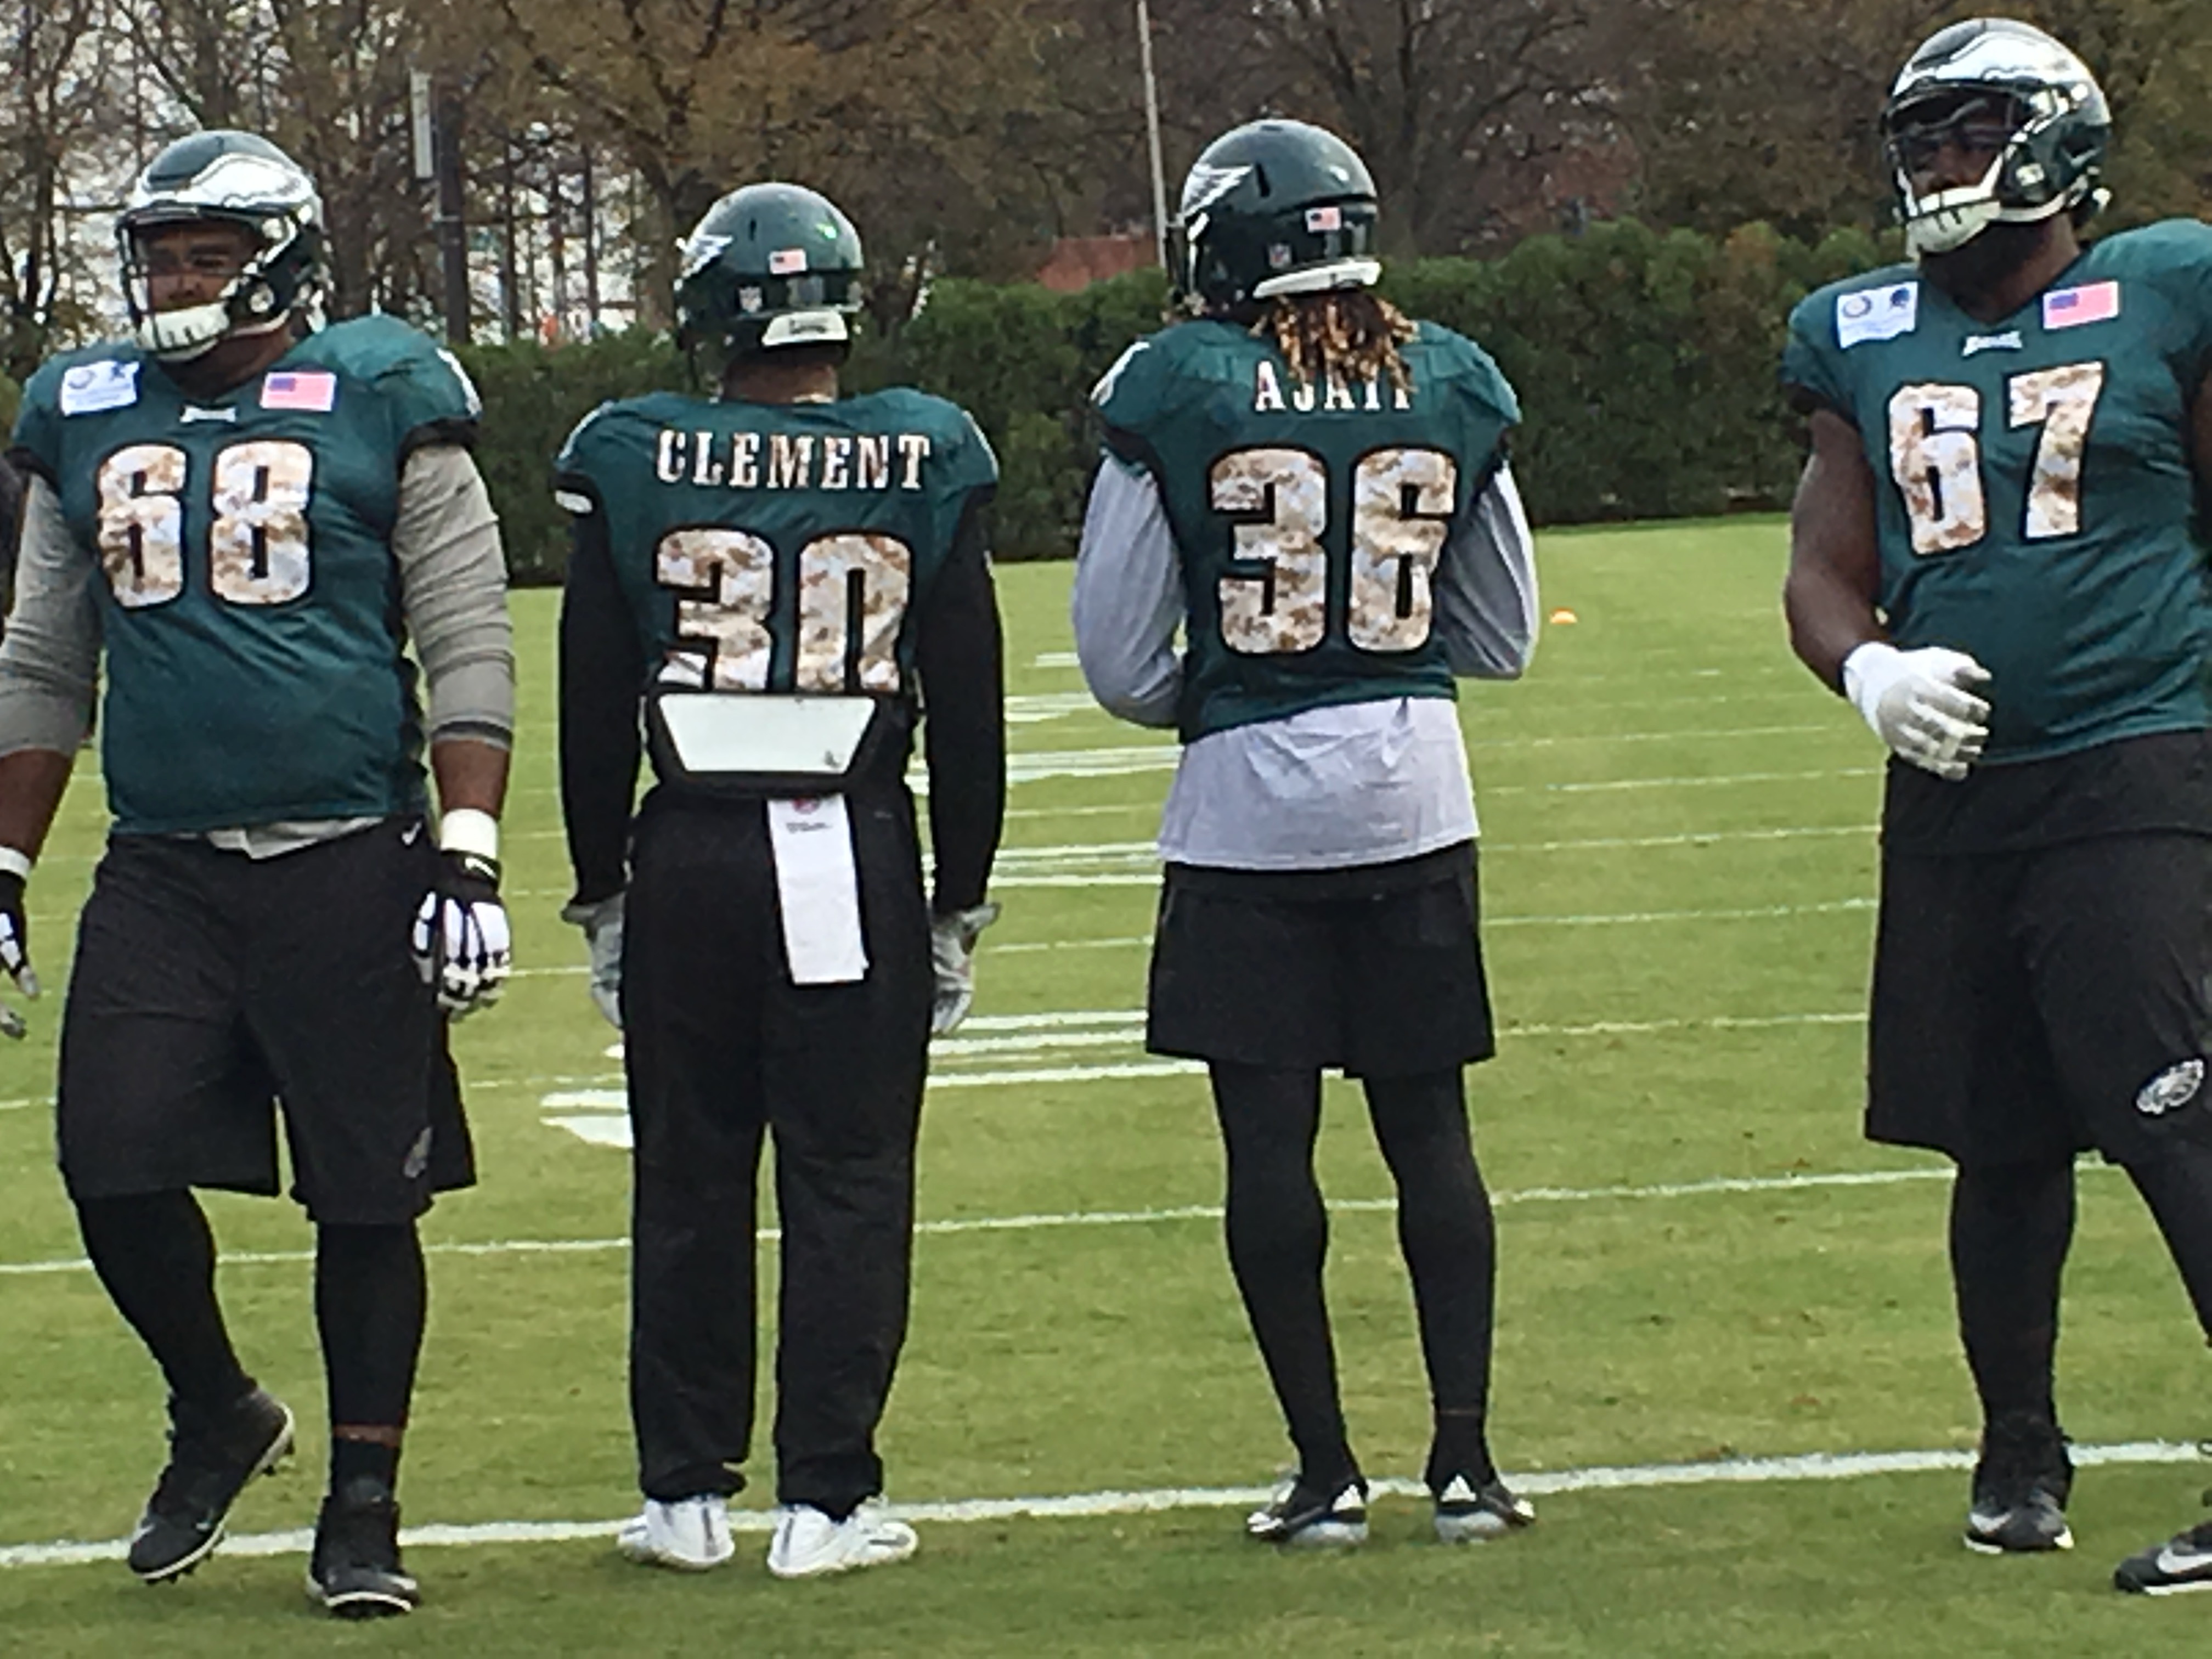 Video:  LeGarrette Blount & Jay Ajayi Talk About The Trade & Playing Together